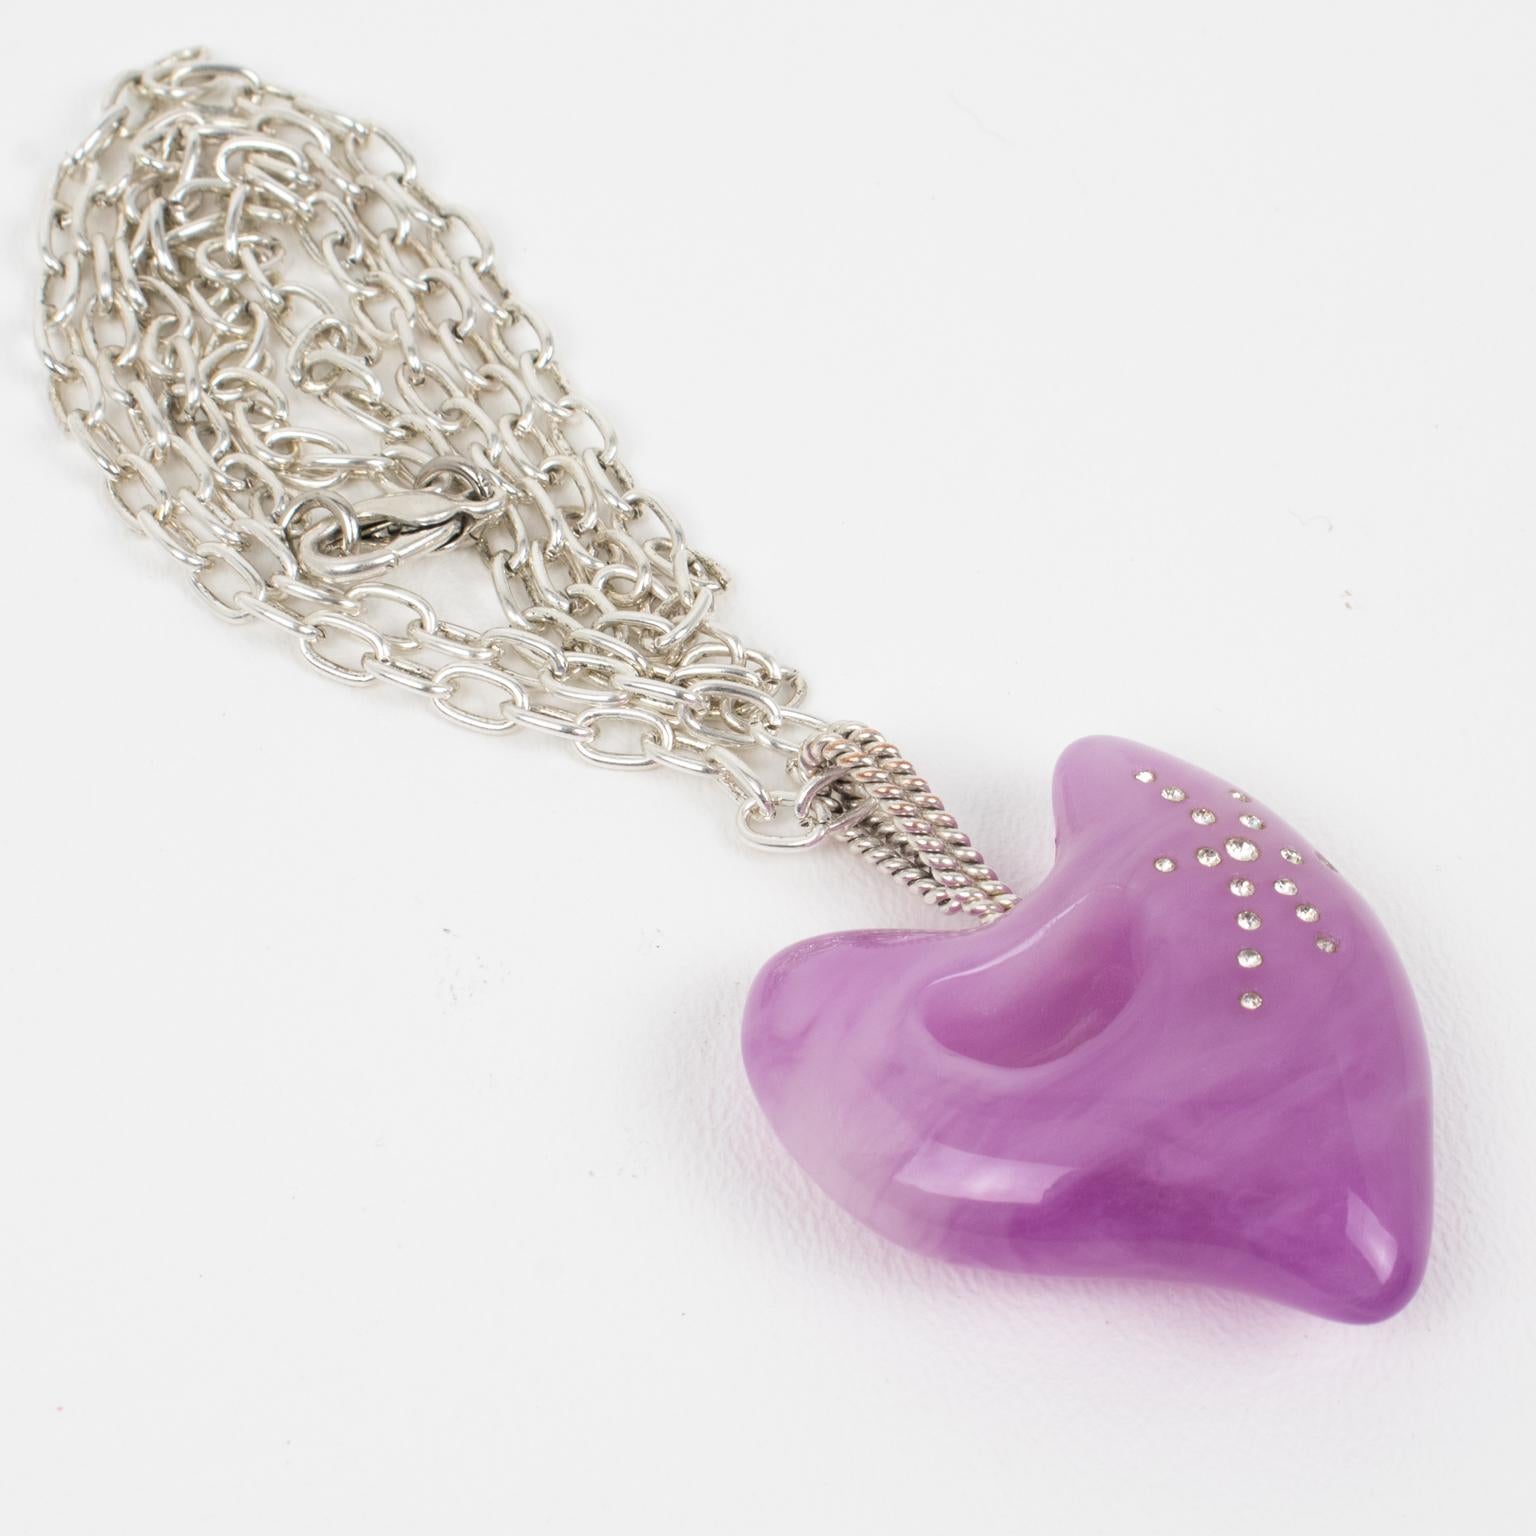 This stunning Christian Lacroix Paris pendant necklace features a silver plate long chain complimented with a dimensional resin heart ornate with crystal rhinestones. Fabulous lavender purple color, all marbled and swirled. The pendant has silvered